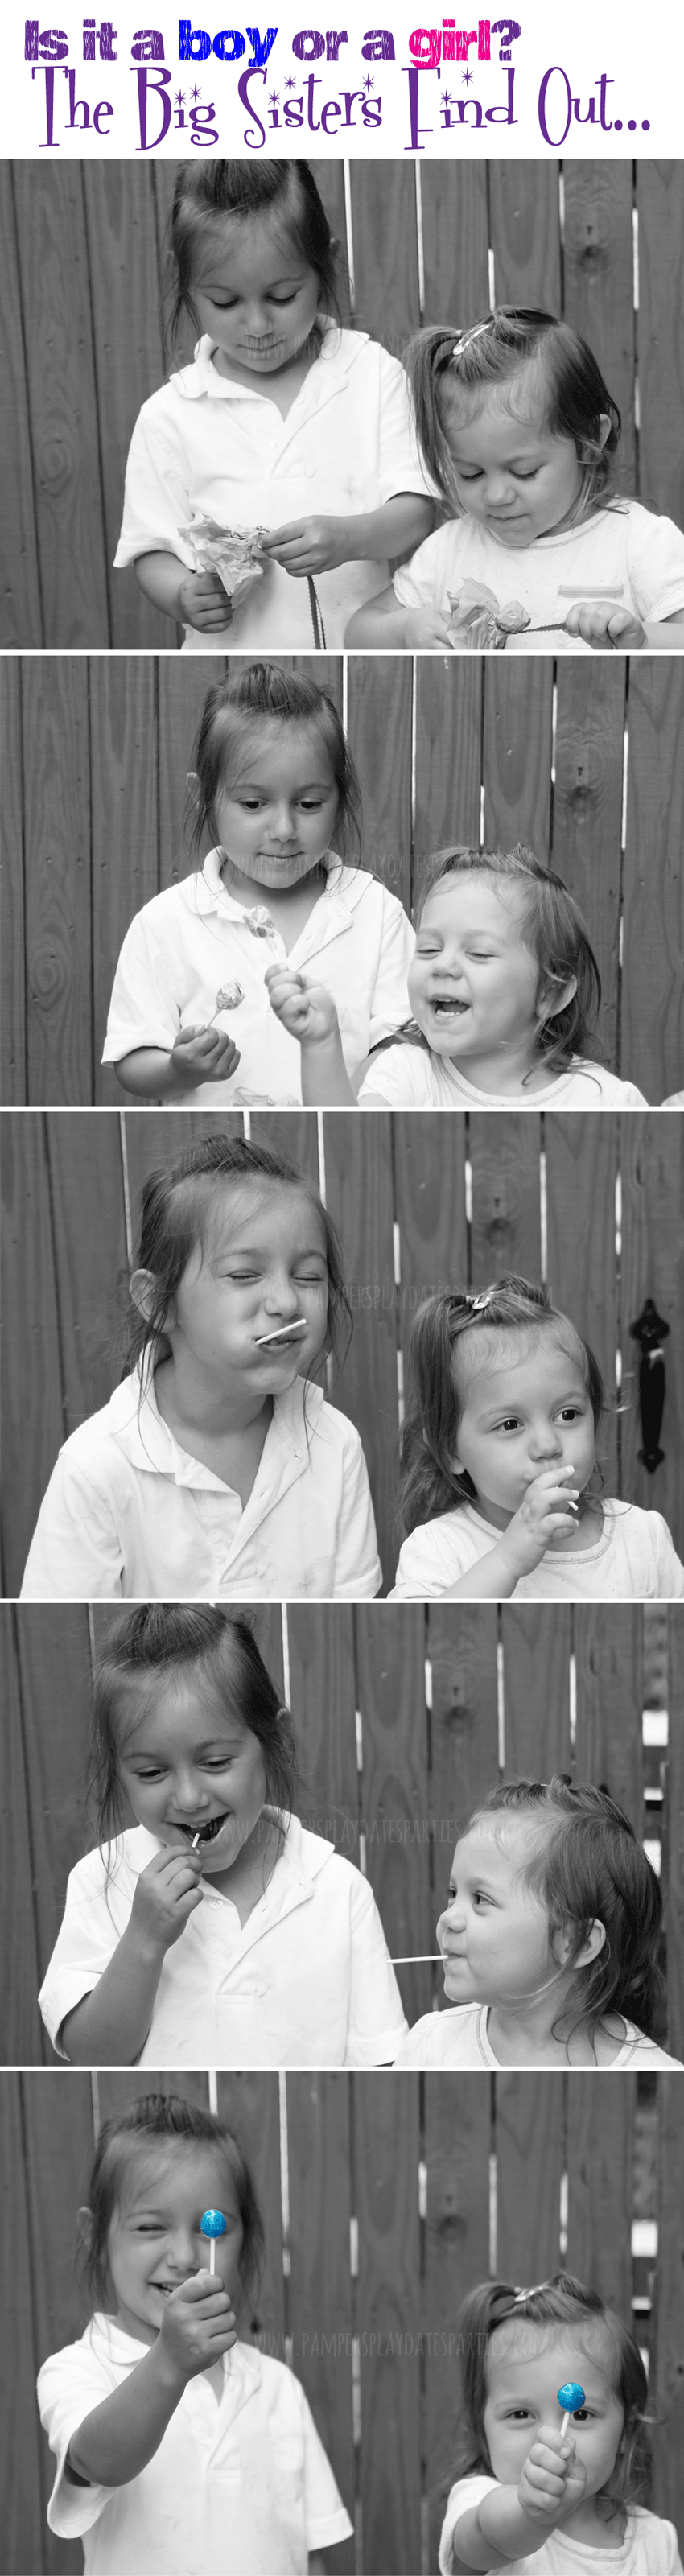 Two adorable gender reveal photos. One with a lineup of family shoes and the other in black and white with the siblings showing a lollipop.